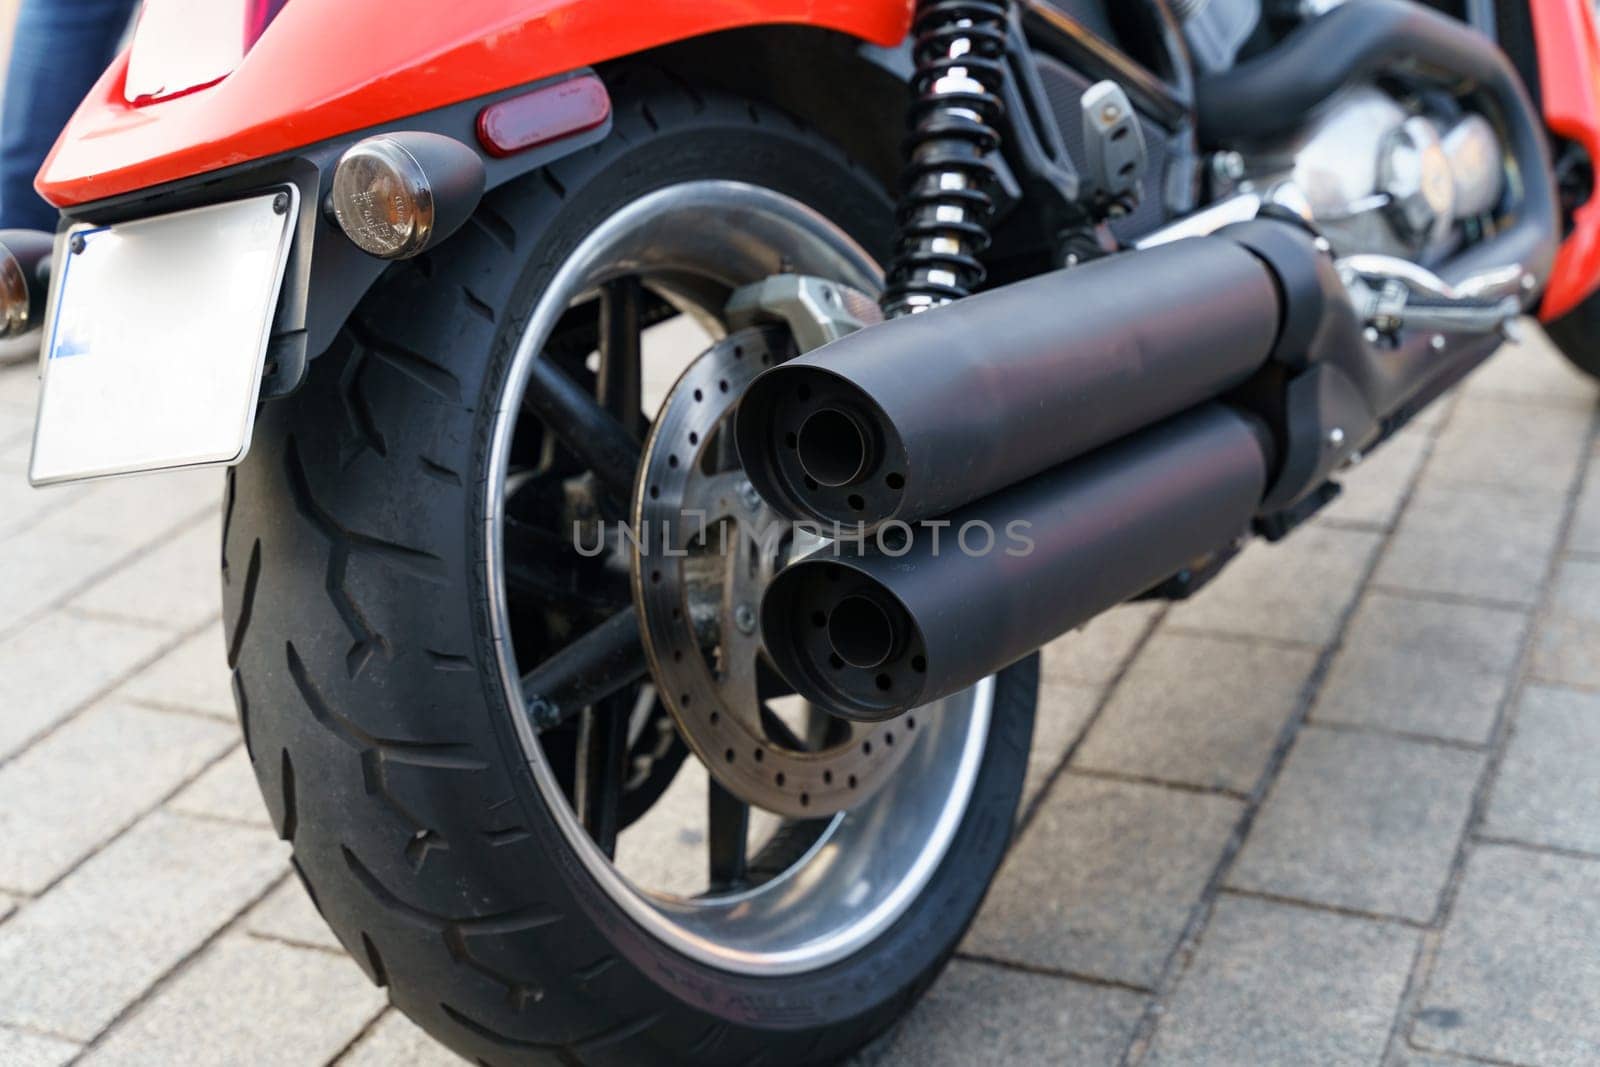 Warsaw, Poland - August 6, 2023: A Harley Davidson motorcycle stands in a parking lot, detailed rear view.